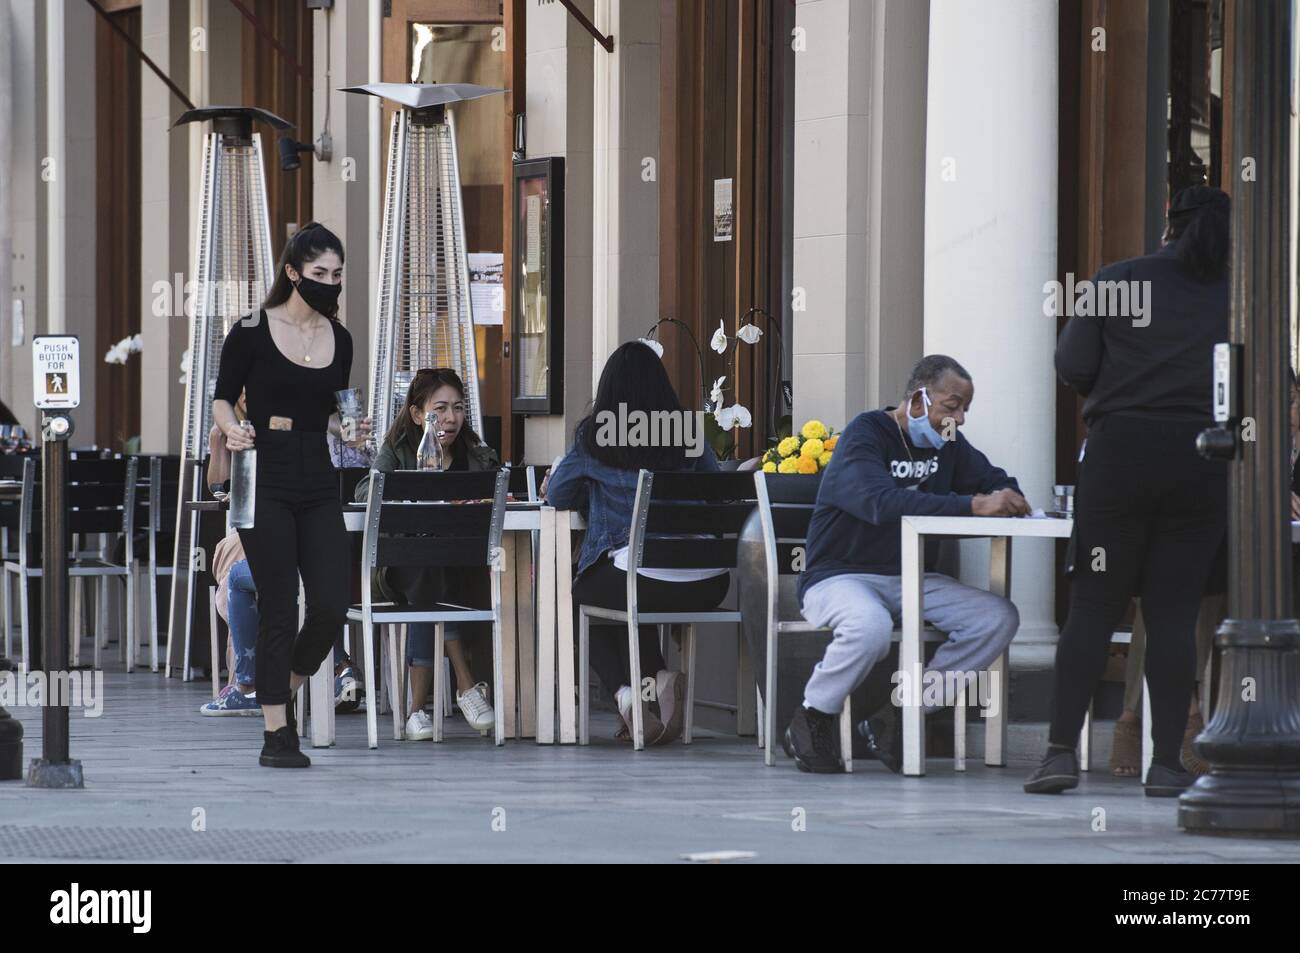 Burlingame, United States. 15th July, 2020. A waitress brings water to patrons seated on the sidewalk outside of Flights Restaurant in Burlingame, California on Tuesday, July 14, 2020. California's Governor Gavin Newsom has ordered a rollback in openings in some counties amid a spike in COVID-19 cases across the state. Photo by Terry Schmitt/UPI Credit: UPI/Alamy Live News Stock Photo